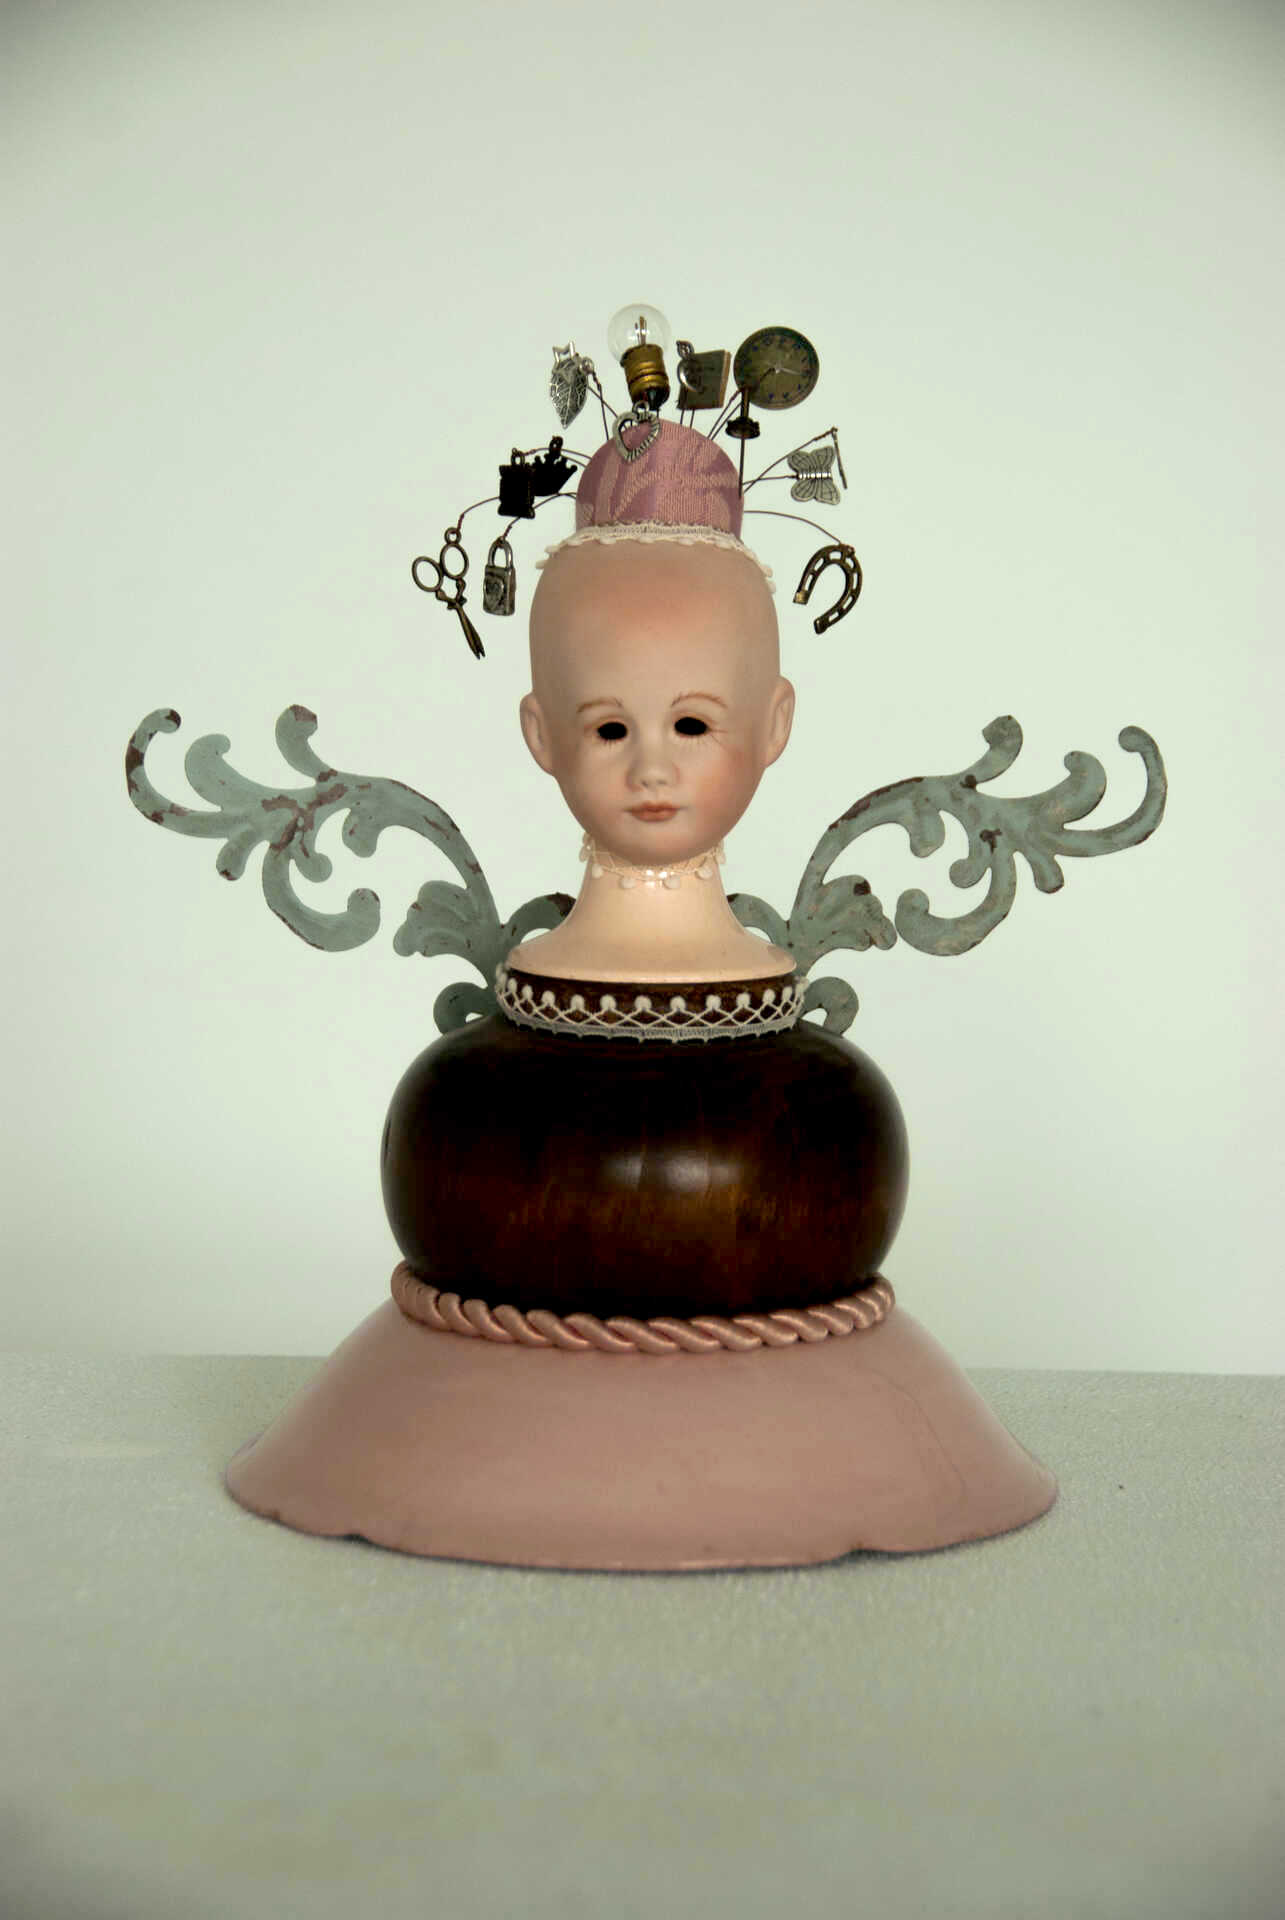 Sculpture "Gather the Tools" by Libby Bloxham. The head and shoulders of a porcelain doll are posed atop a wooden bulb and rose pink base, decorated with white lace and pink brocade. The doll has no hair affixed, but wears a small, rose pink cap. Suspended from the cap, on gently curving wires, are all manner of tools and trinkets, including scissors, a horseshoe, a padlock and a lightbulb. Metal flourishes, art nouveau style with a weathered grey-green finish, suggest the shape of wings where the doll's neck meets the sculpture's base.